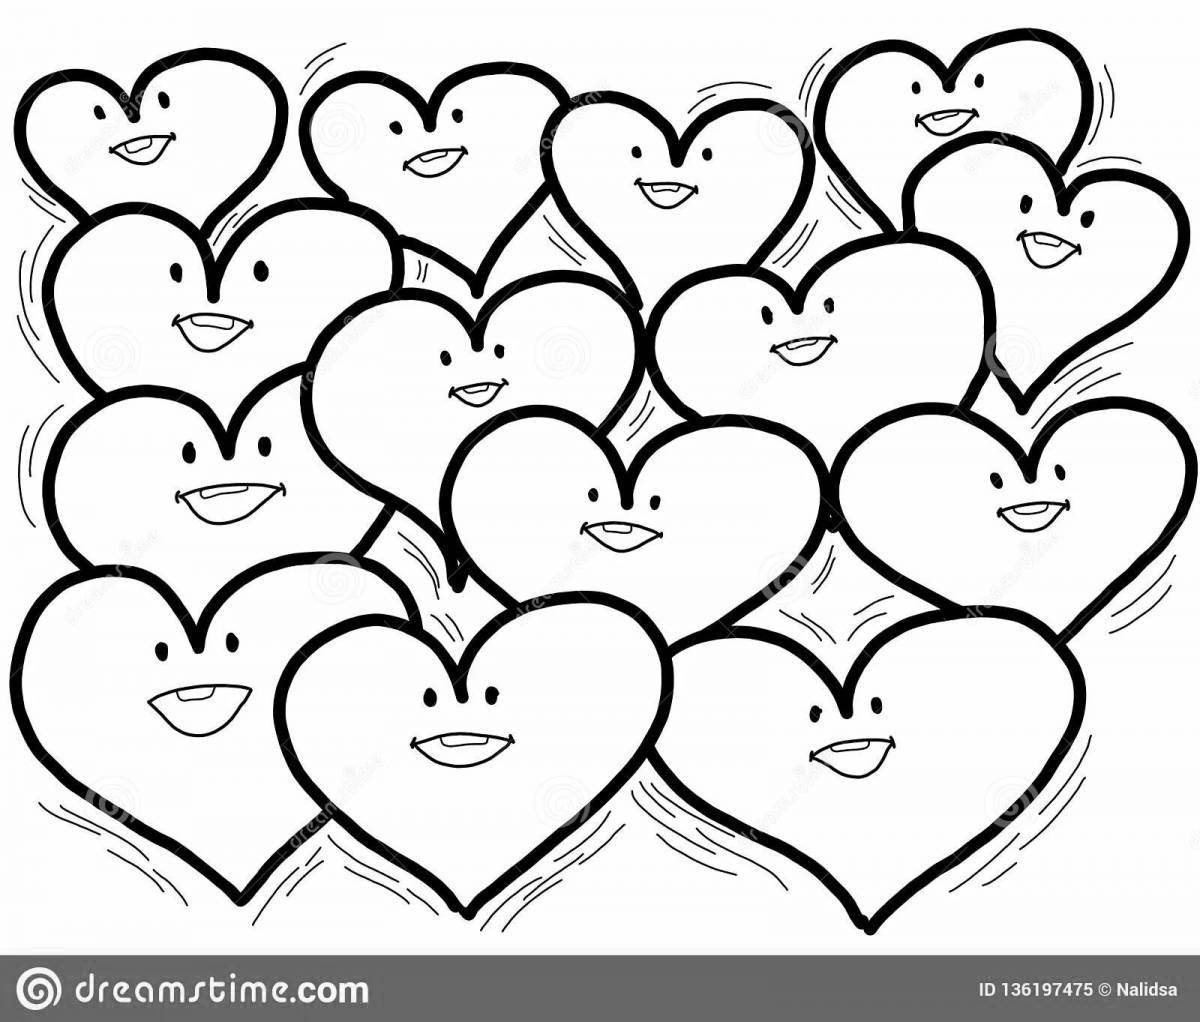 Adorable rainbow heart coloring page